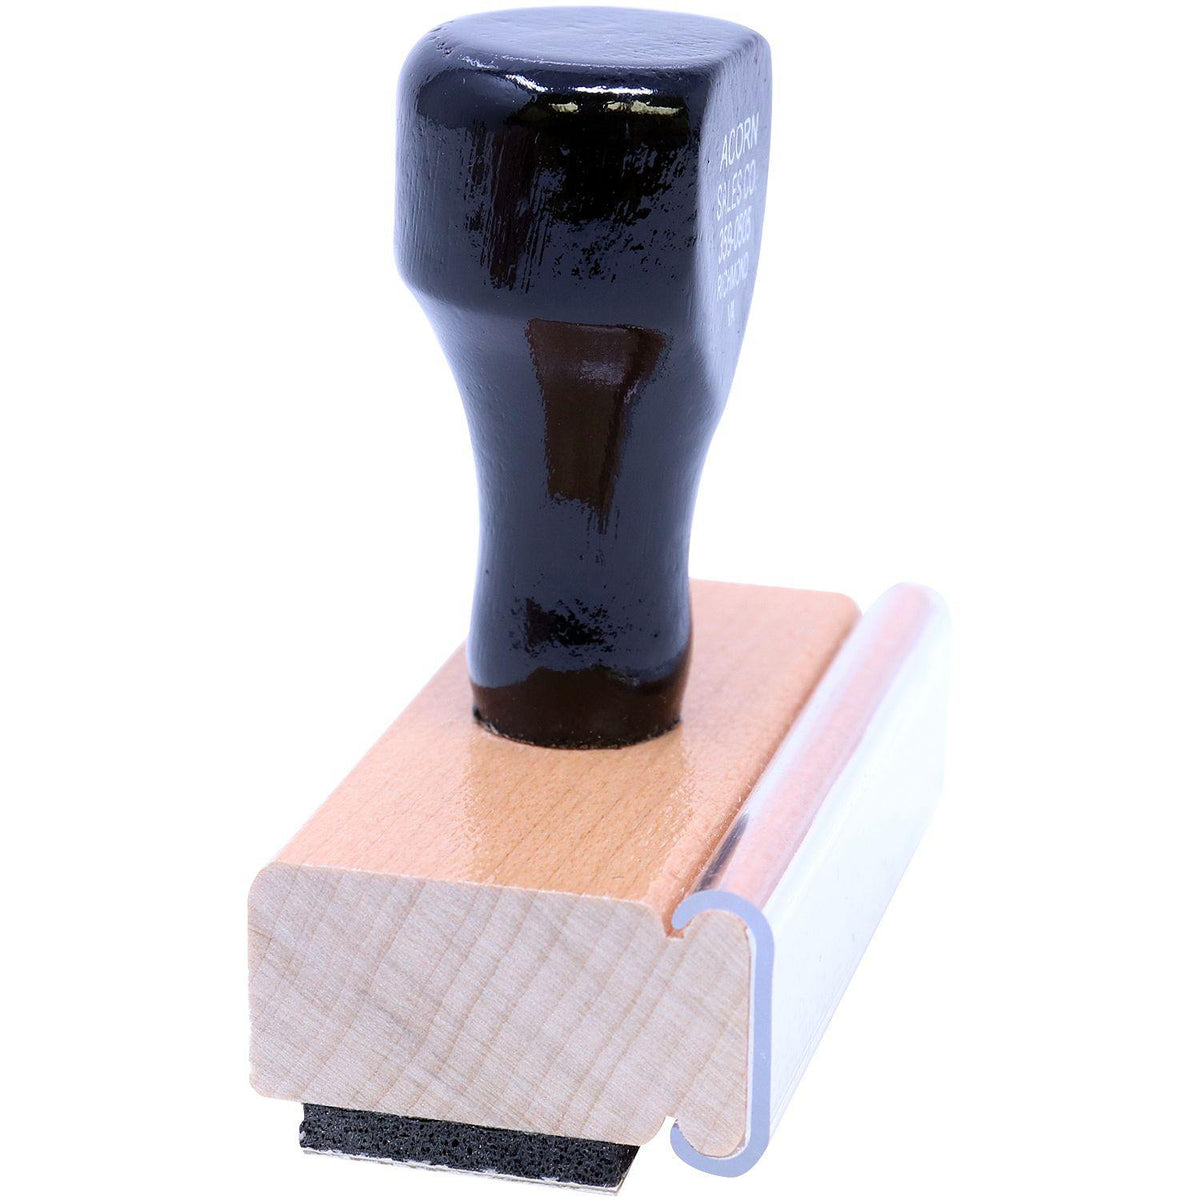 Side View of COD Rubber Stamp at an Angle